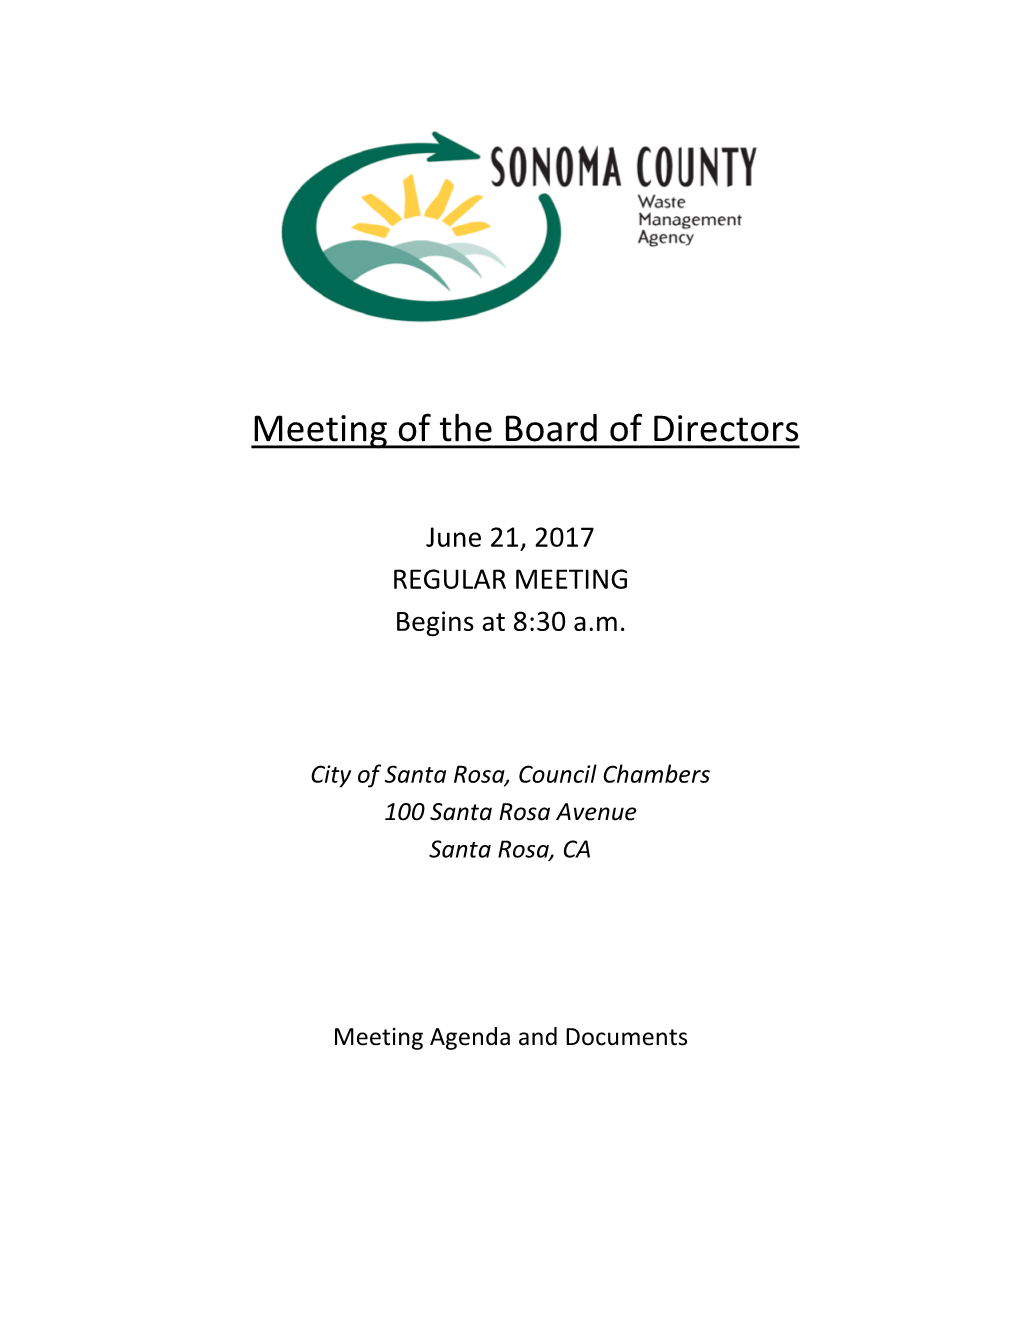 June 21, 2017 Sonoma County Waste Management Agency Meeting